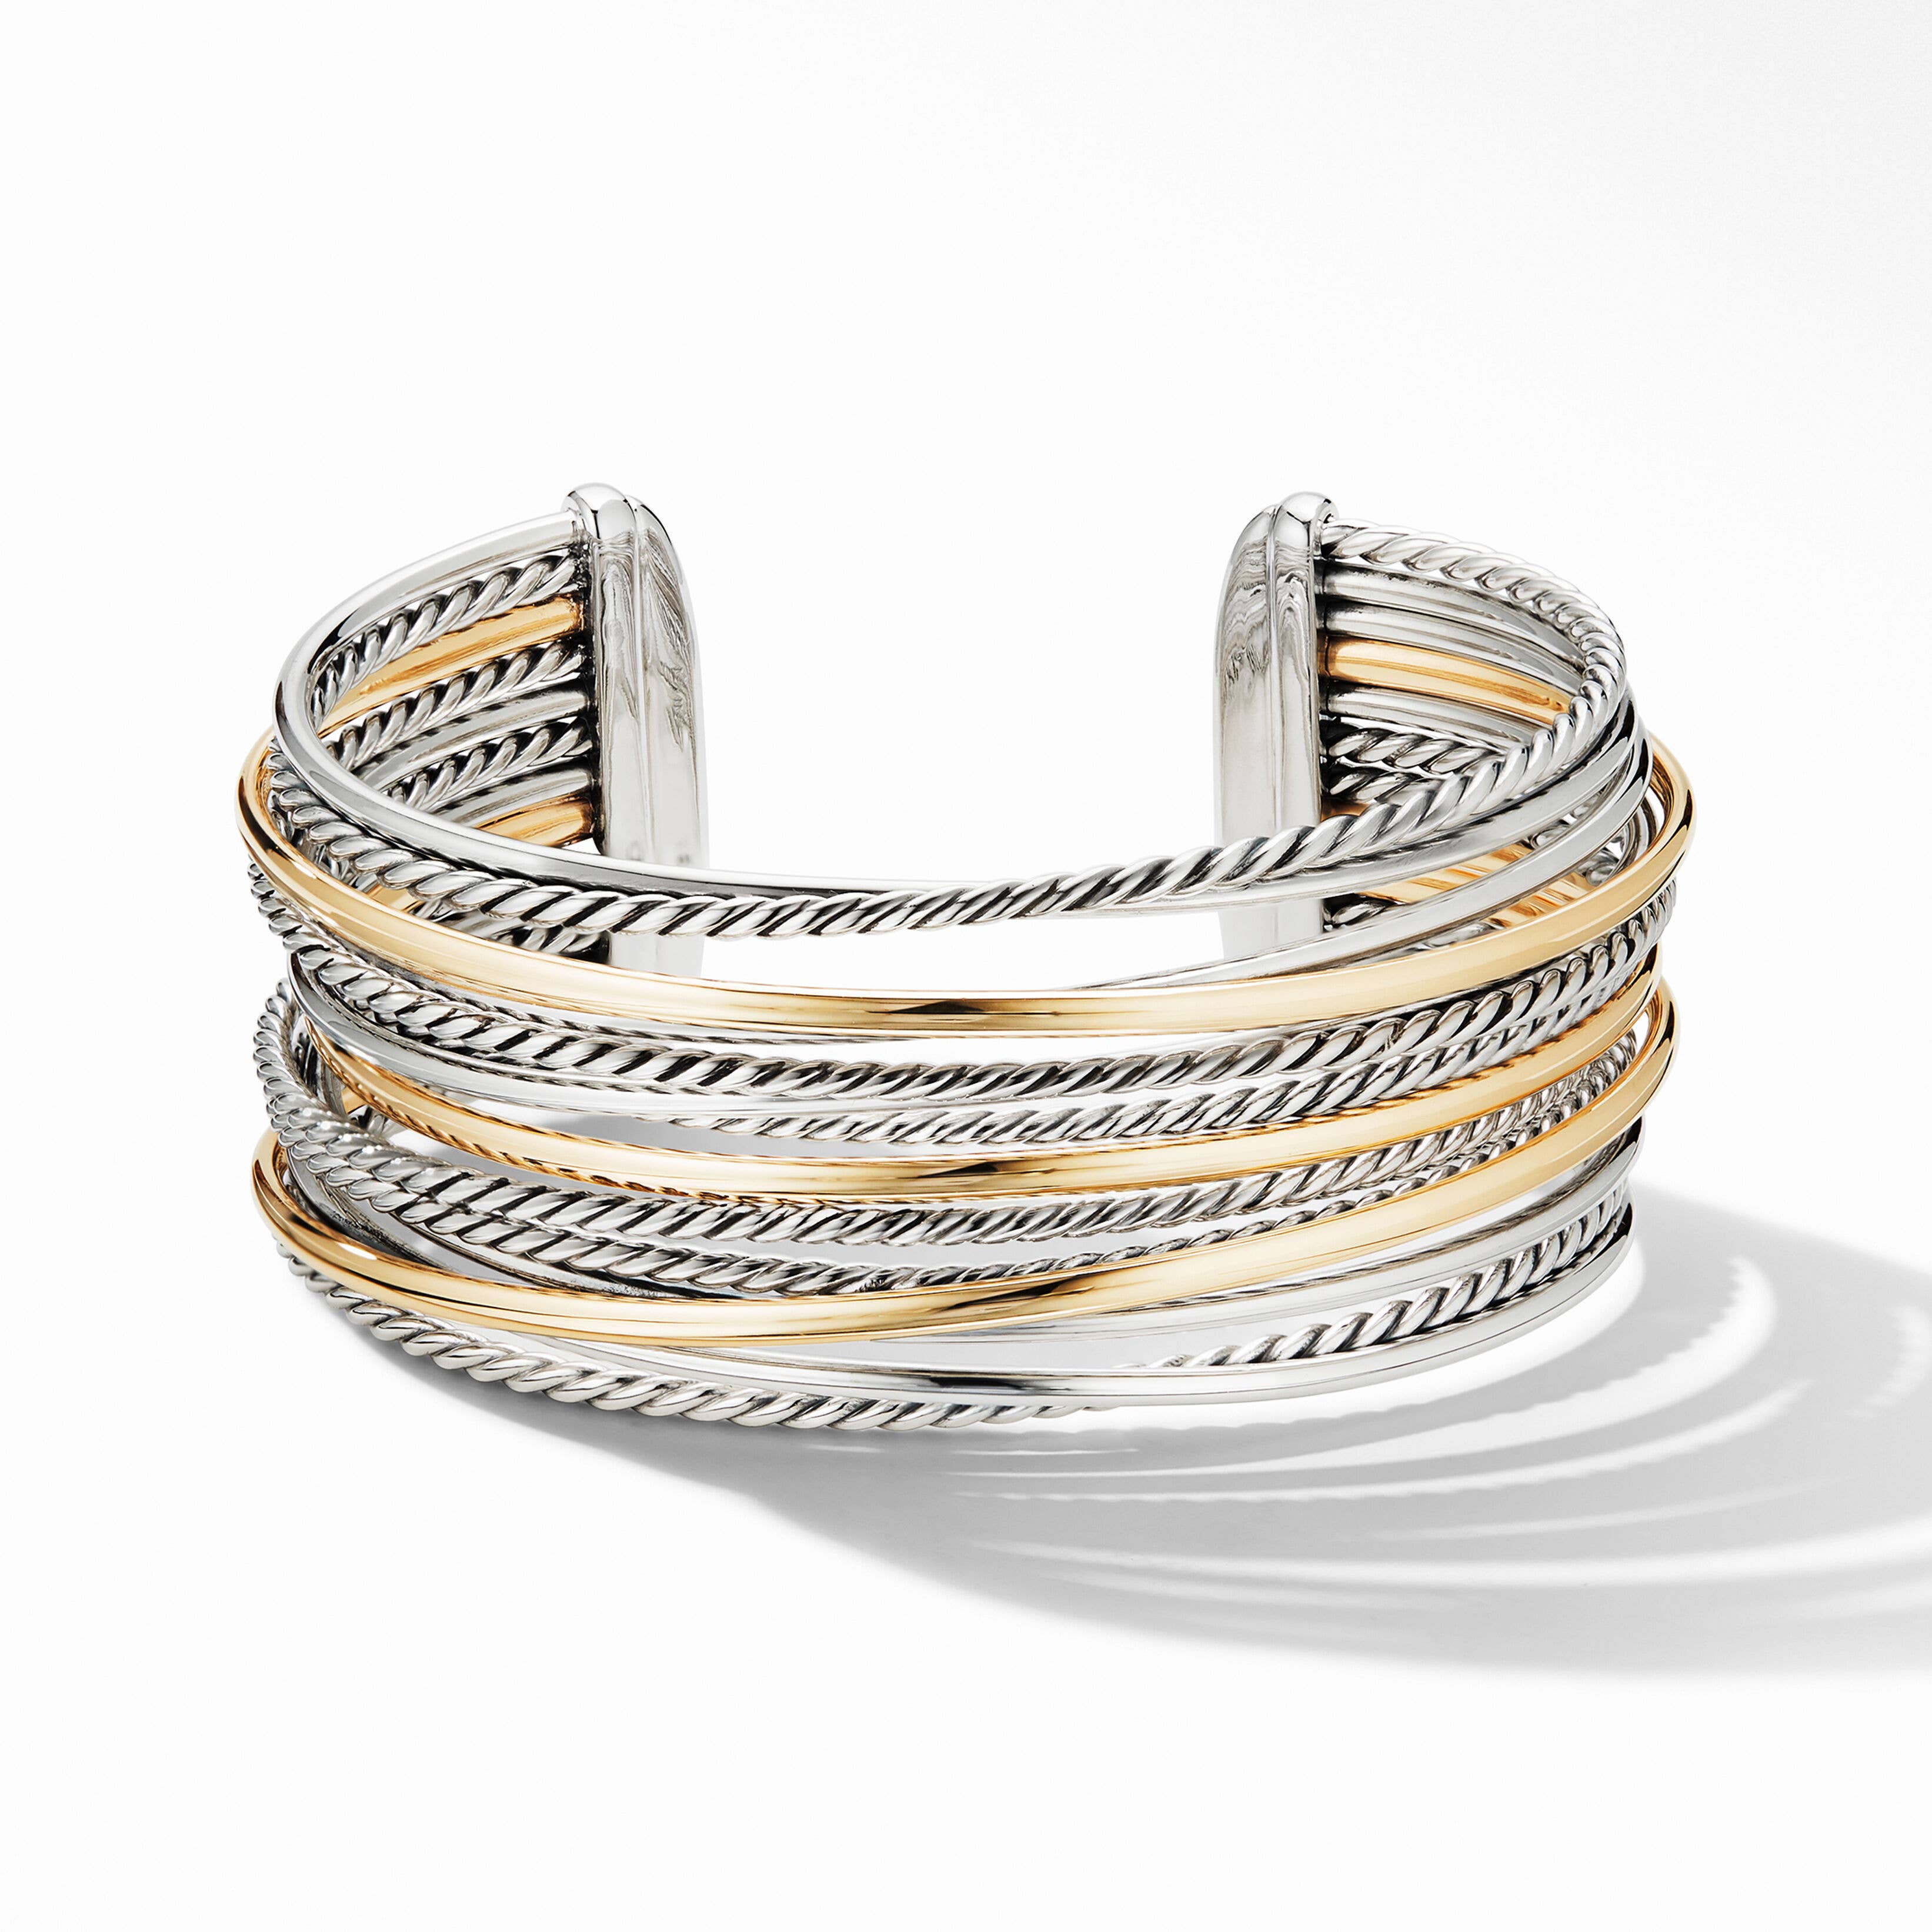 Crossover Cuff Bracelet with 18K Yellow Gold